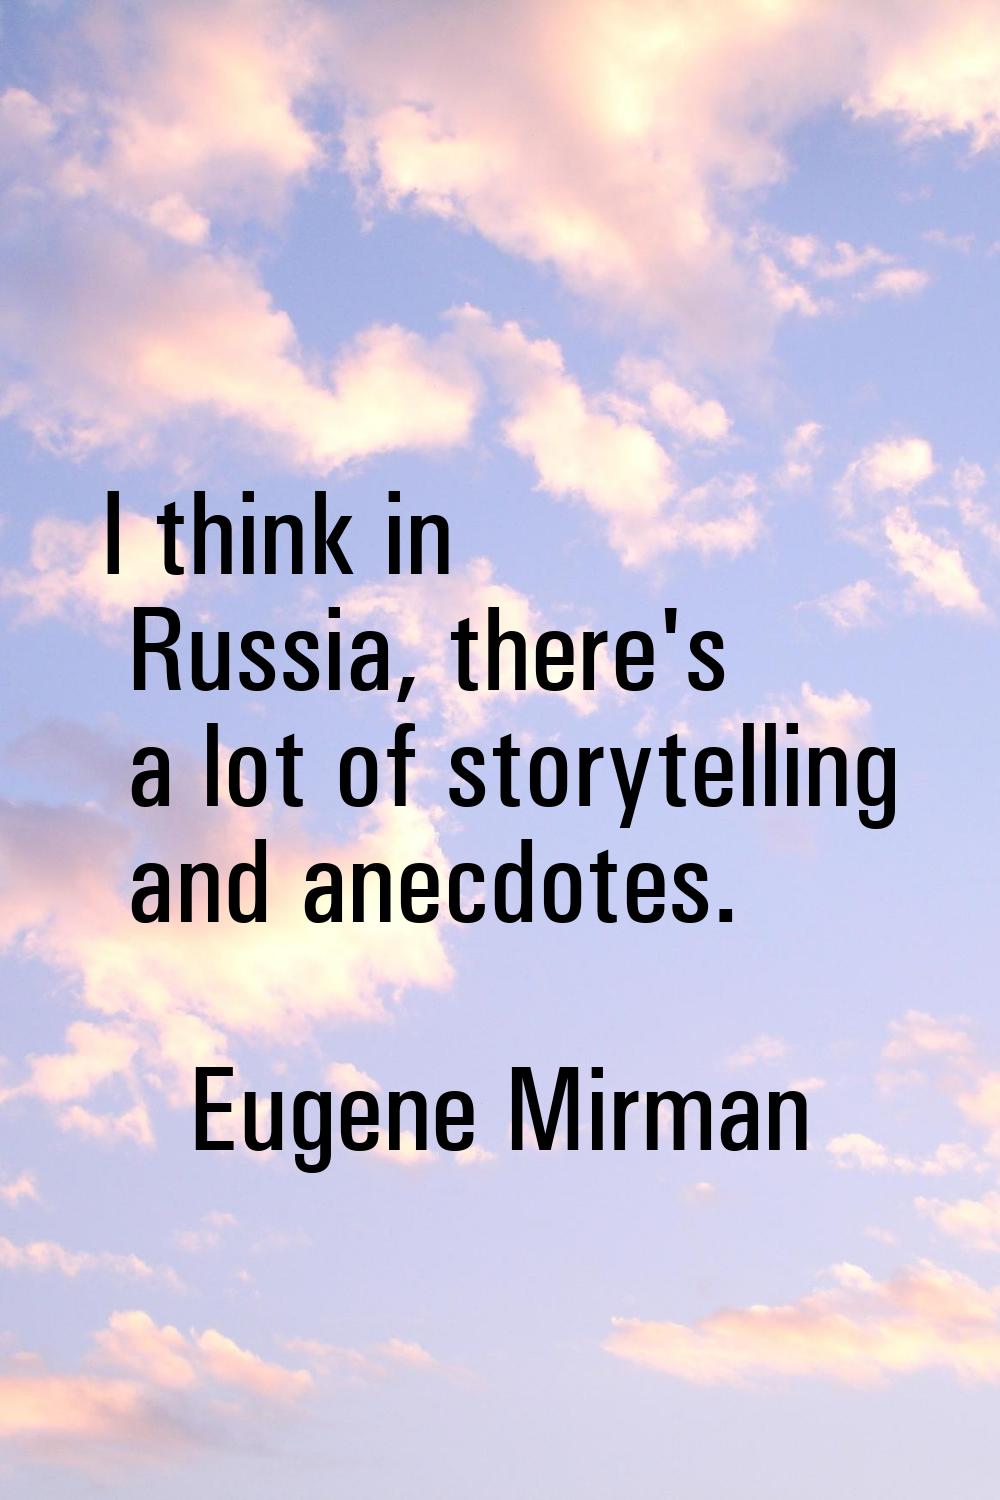 I think in Russia, there's a lot of storytelling and anecdotes.